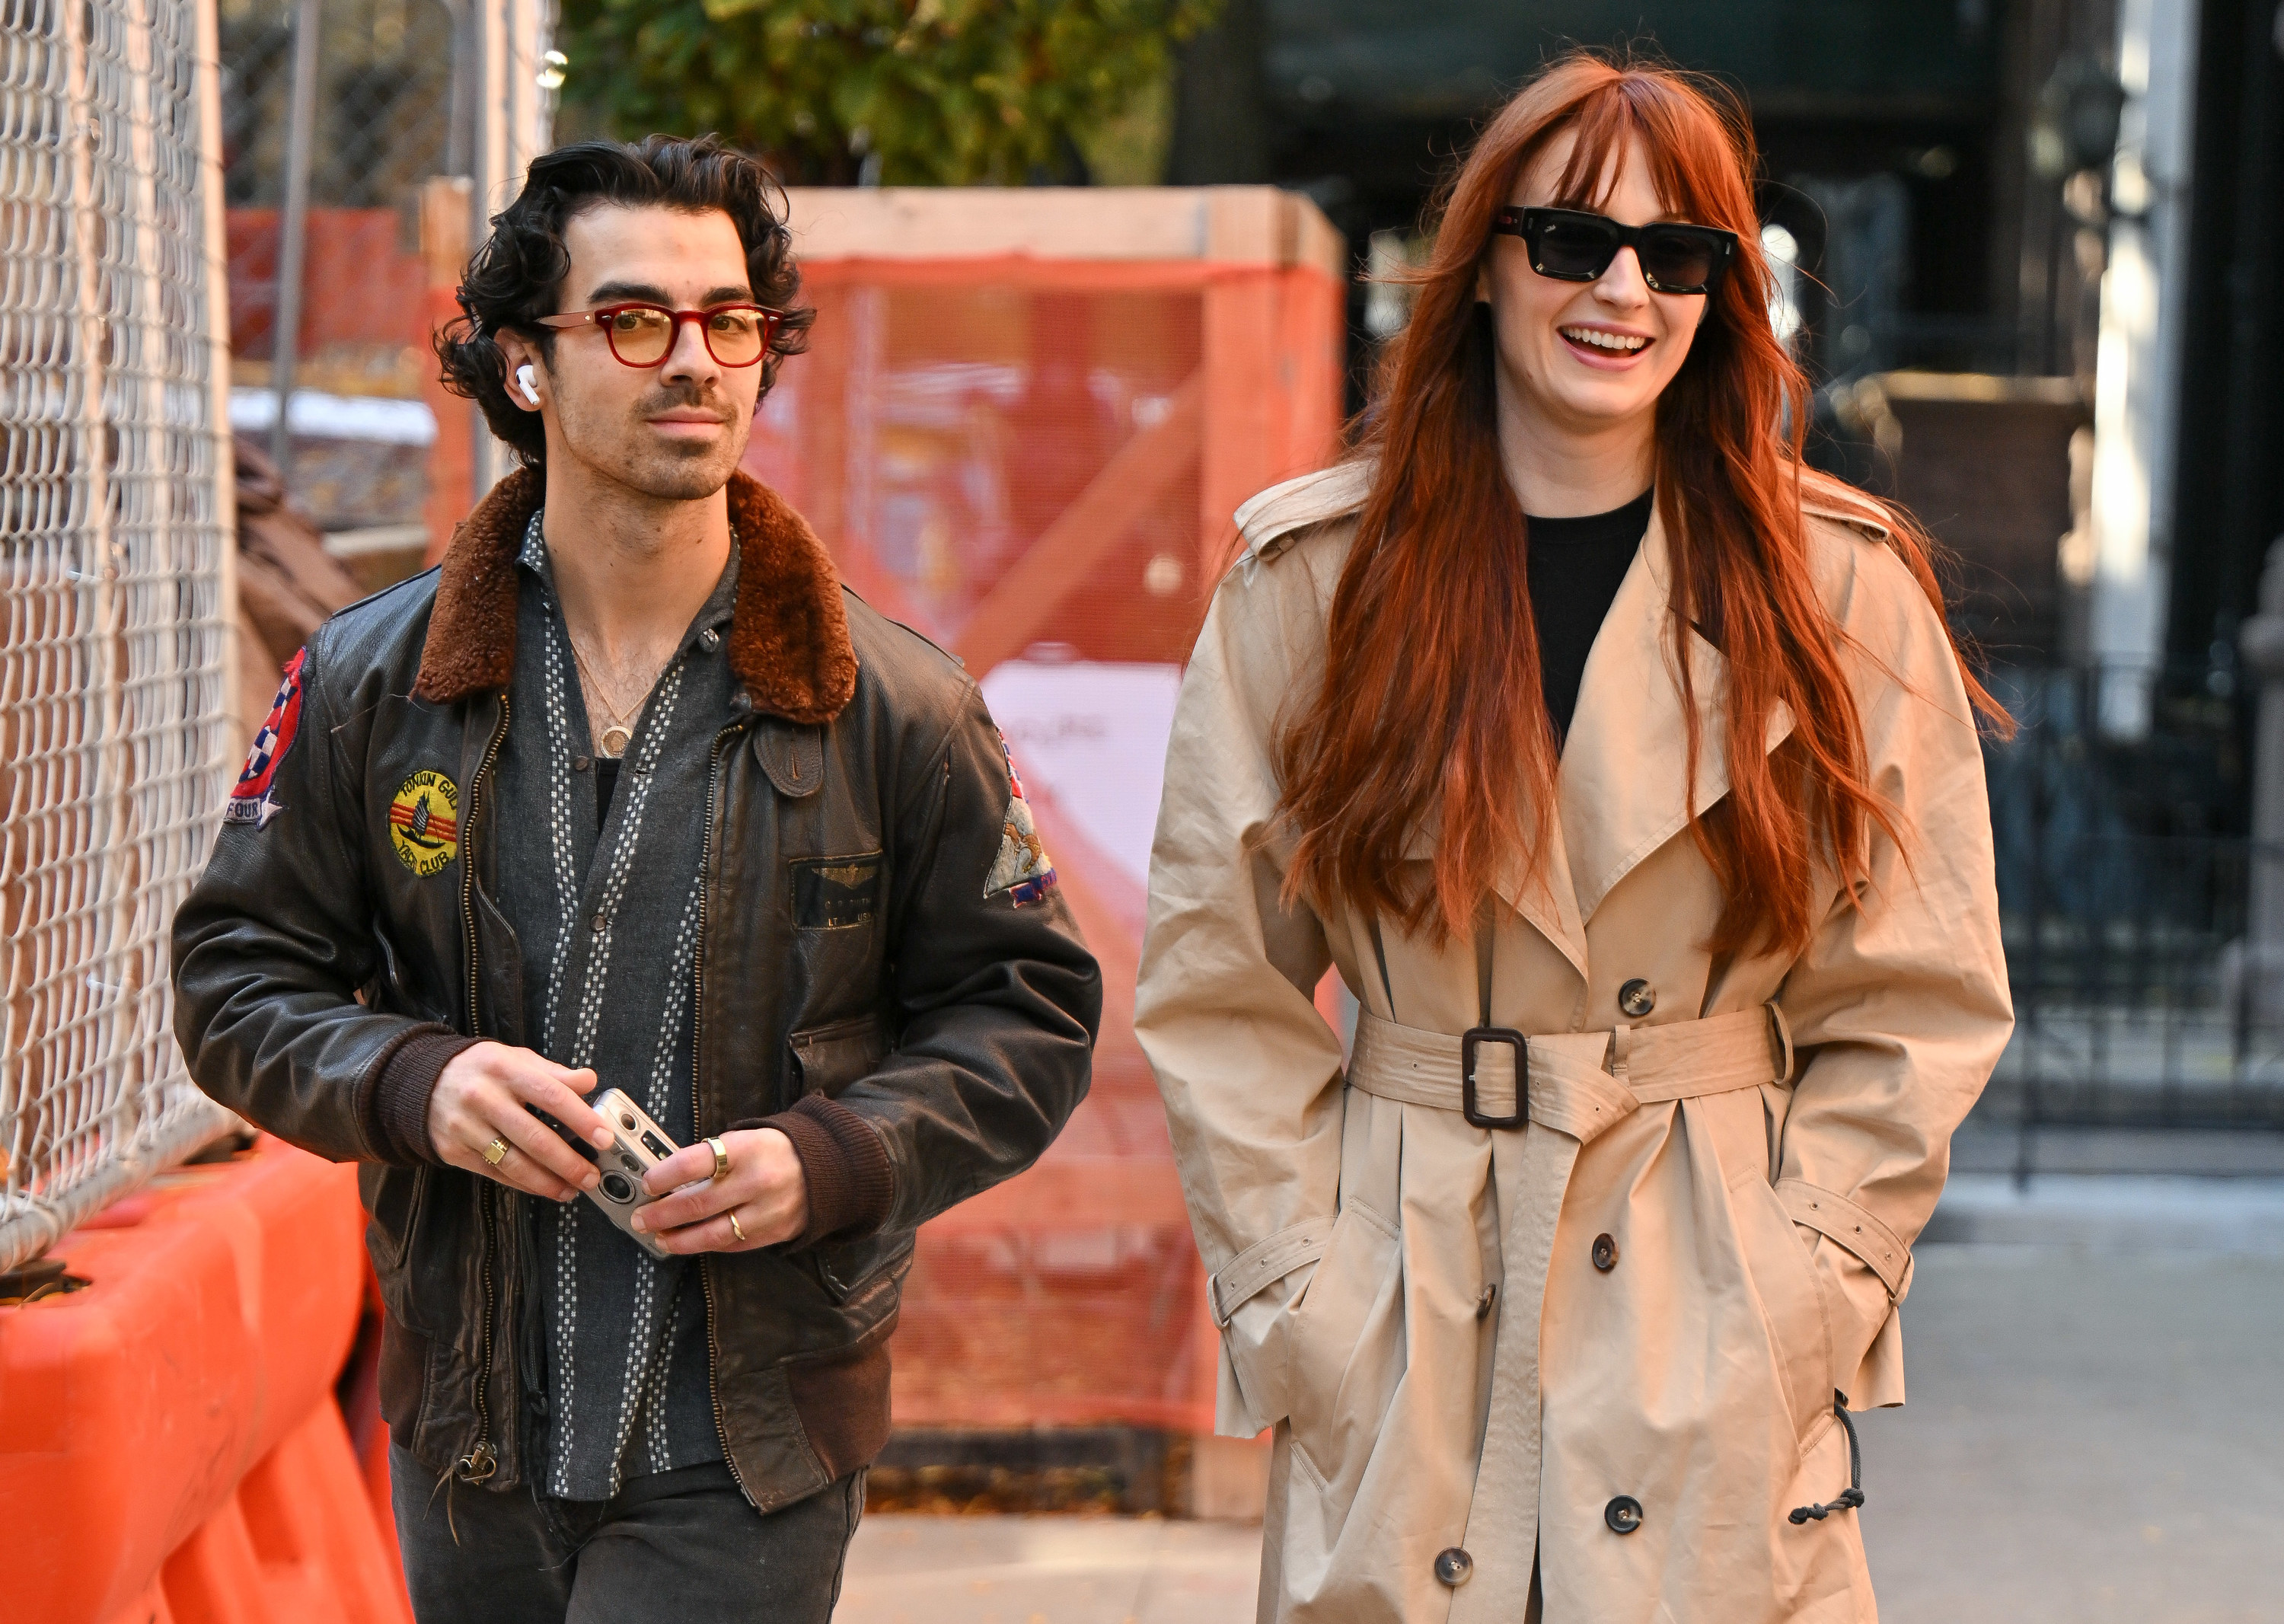 Joe in a leather jacket and Sophie in a trench coat walking on the street